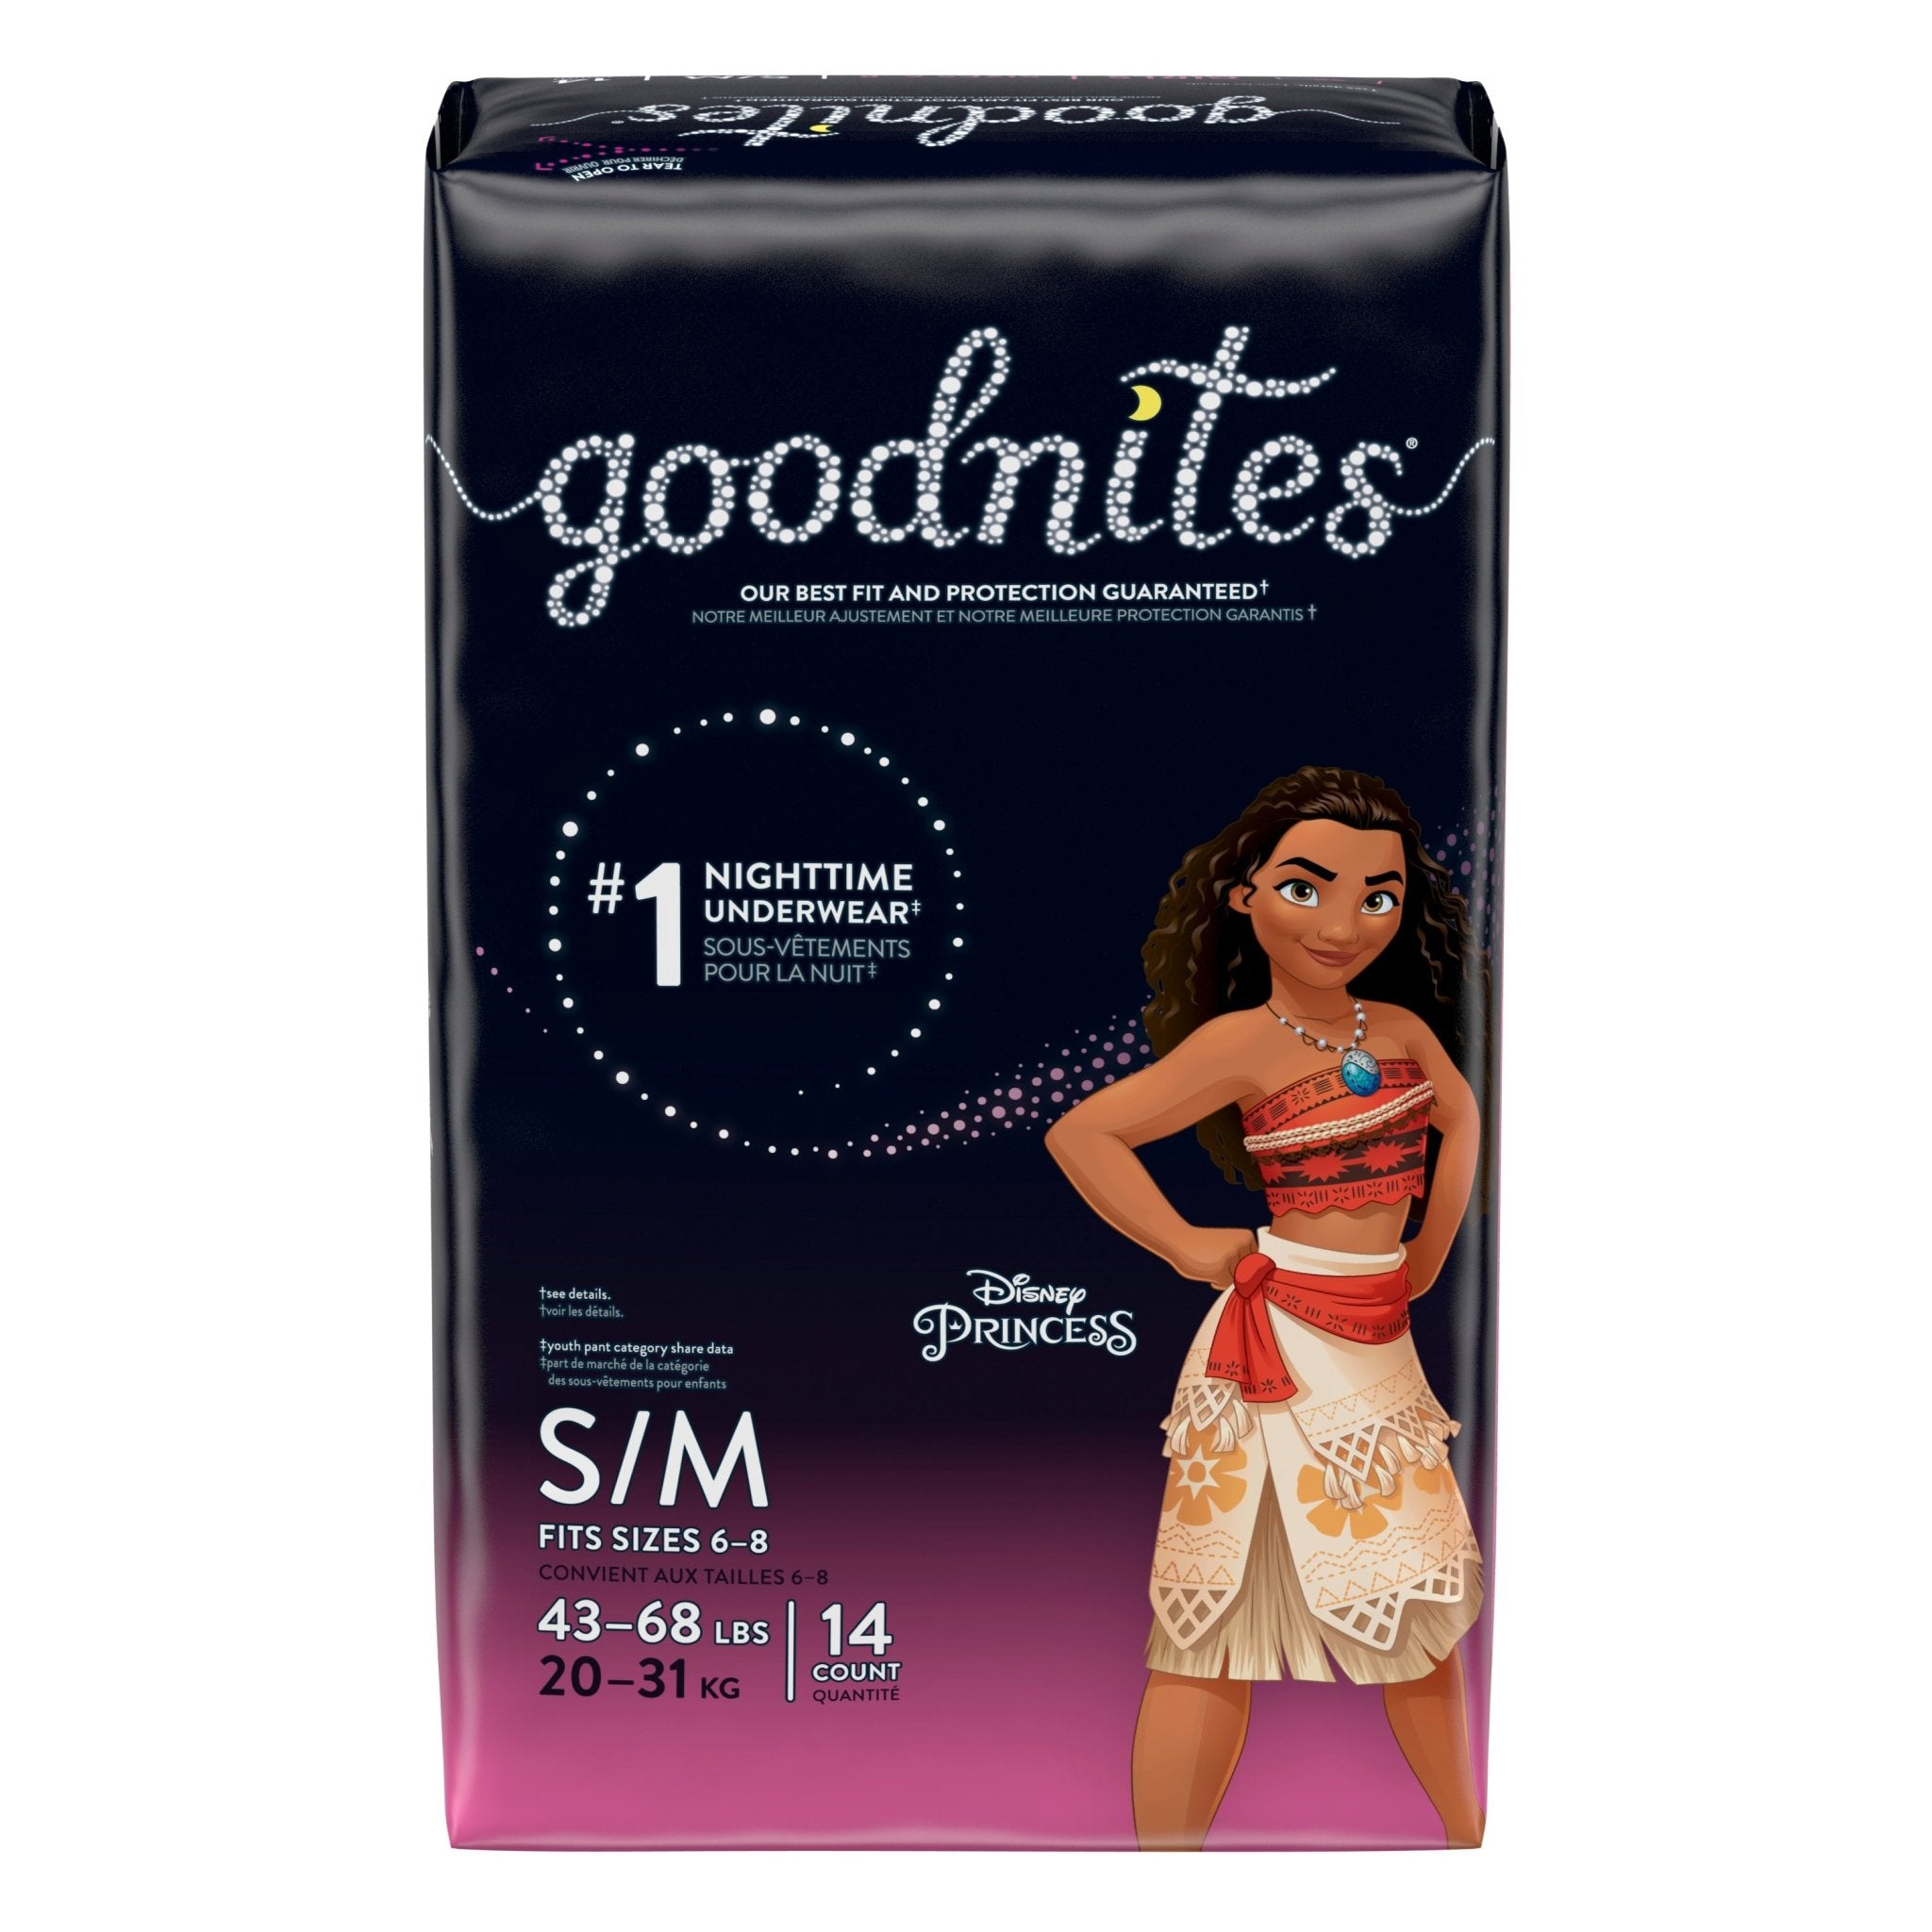 PK/14 - GoodNites Bedtime Bedwetting Underwear for Girls, S-M, 14 Ct. (Packaging May Vary) - Best Buy Medical Supplies